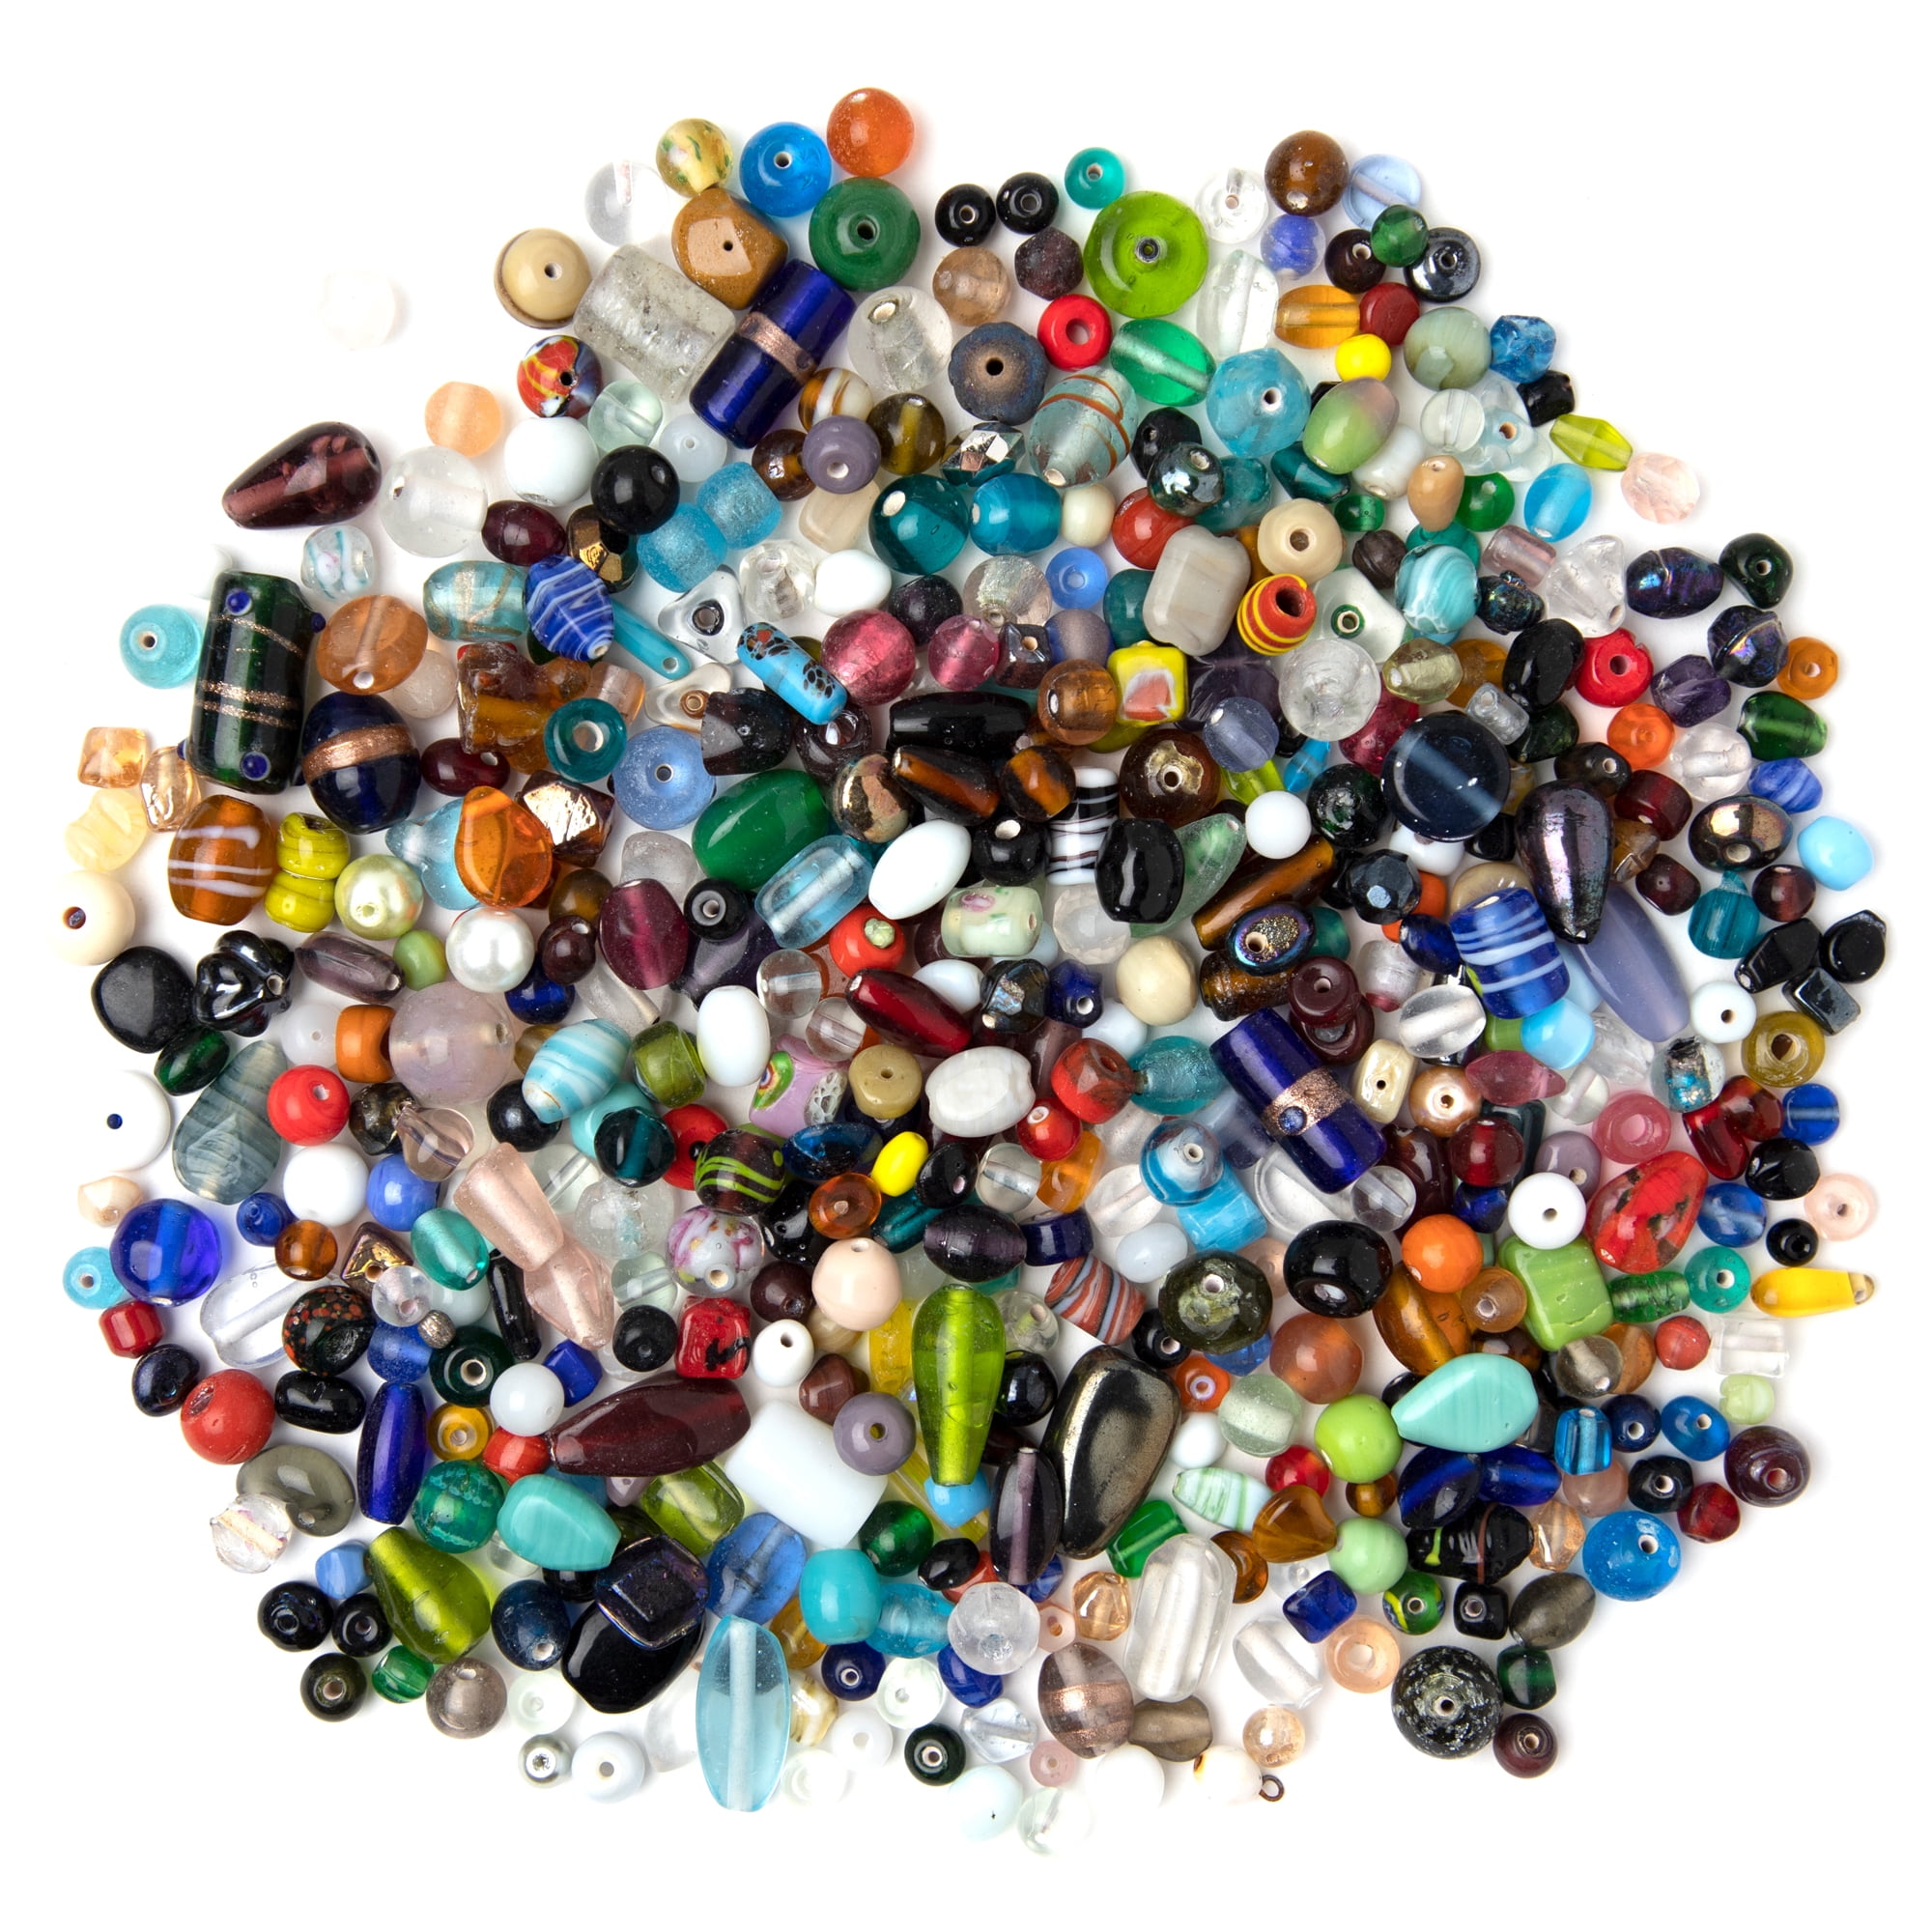 1000pcs 10 Color Crackle Glass Beads 4mm Lampwork Handcrafted